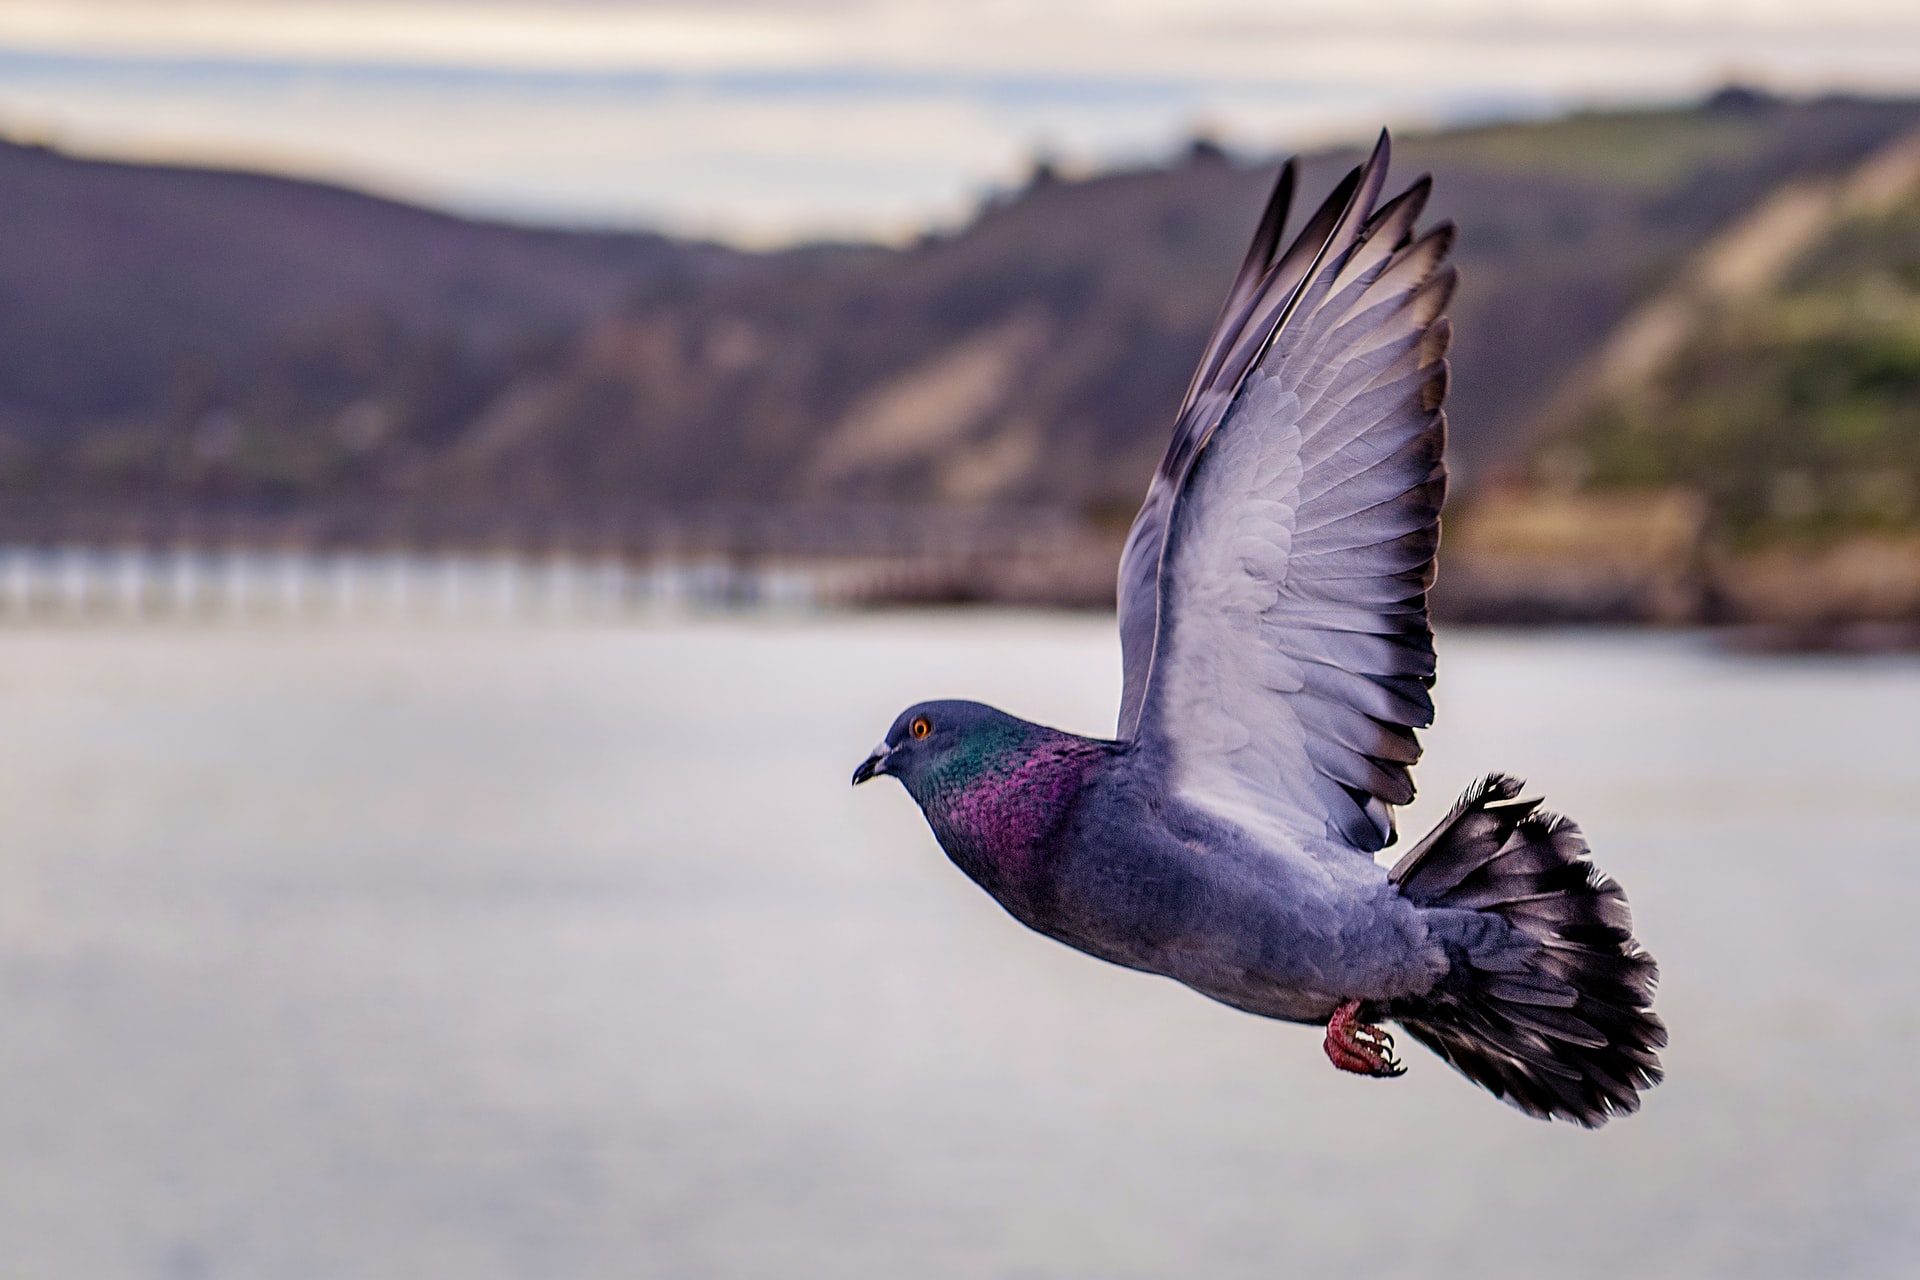 A photograph of a pigeon midflight that shows how pigeons have iridescent feathers around their necks.